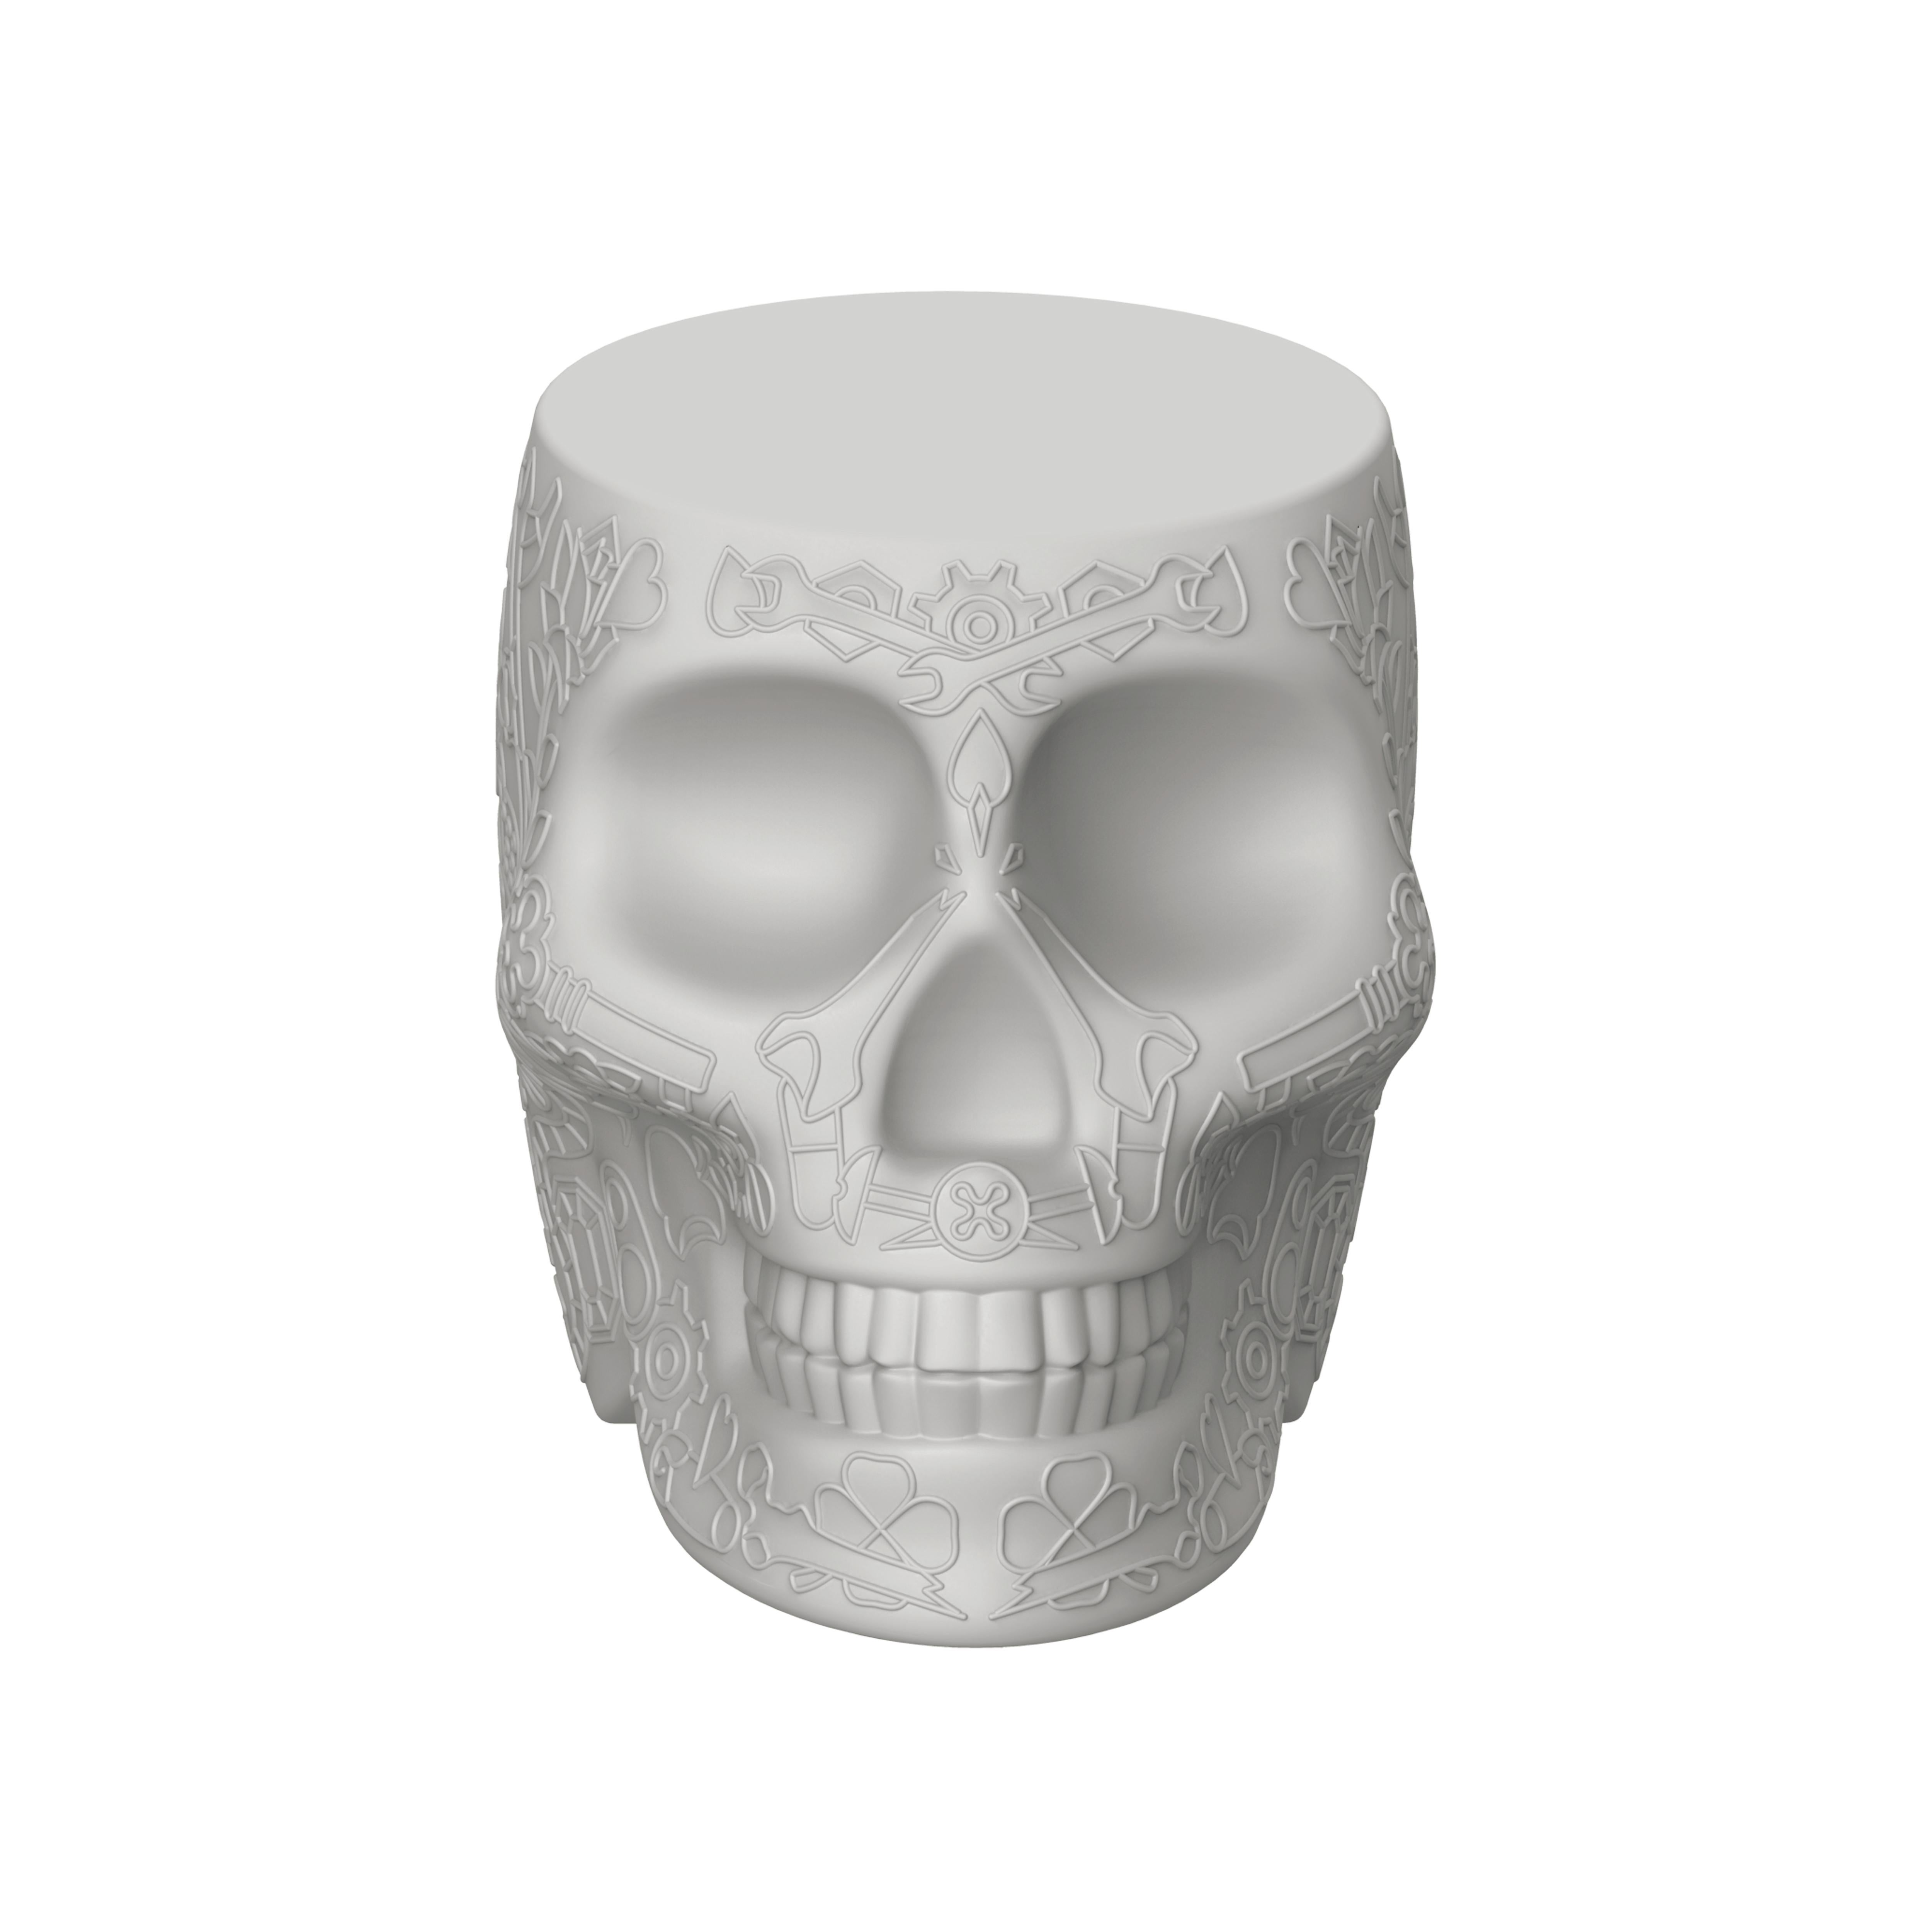 in Stock in Los Angeles, Grey Mexico Skull Mini Portable Charger